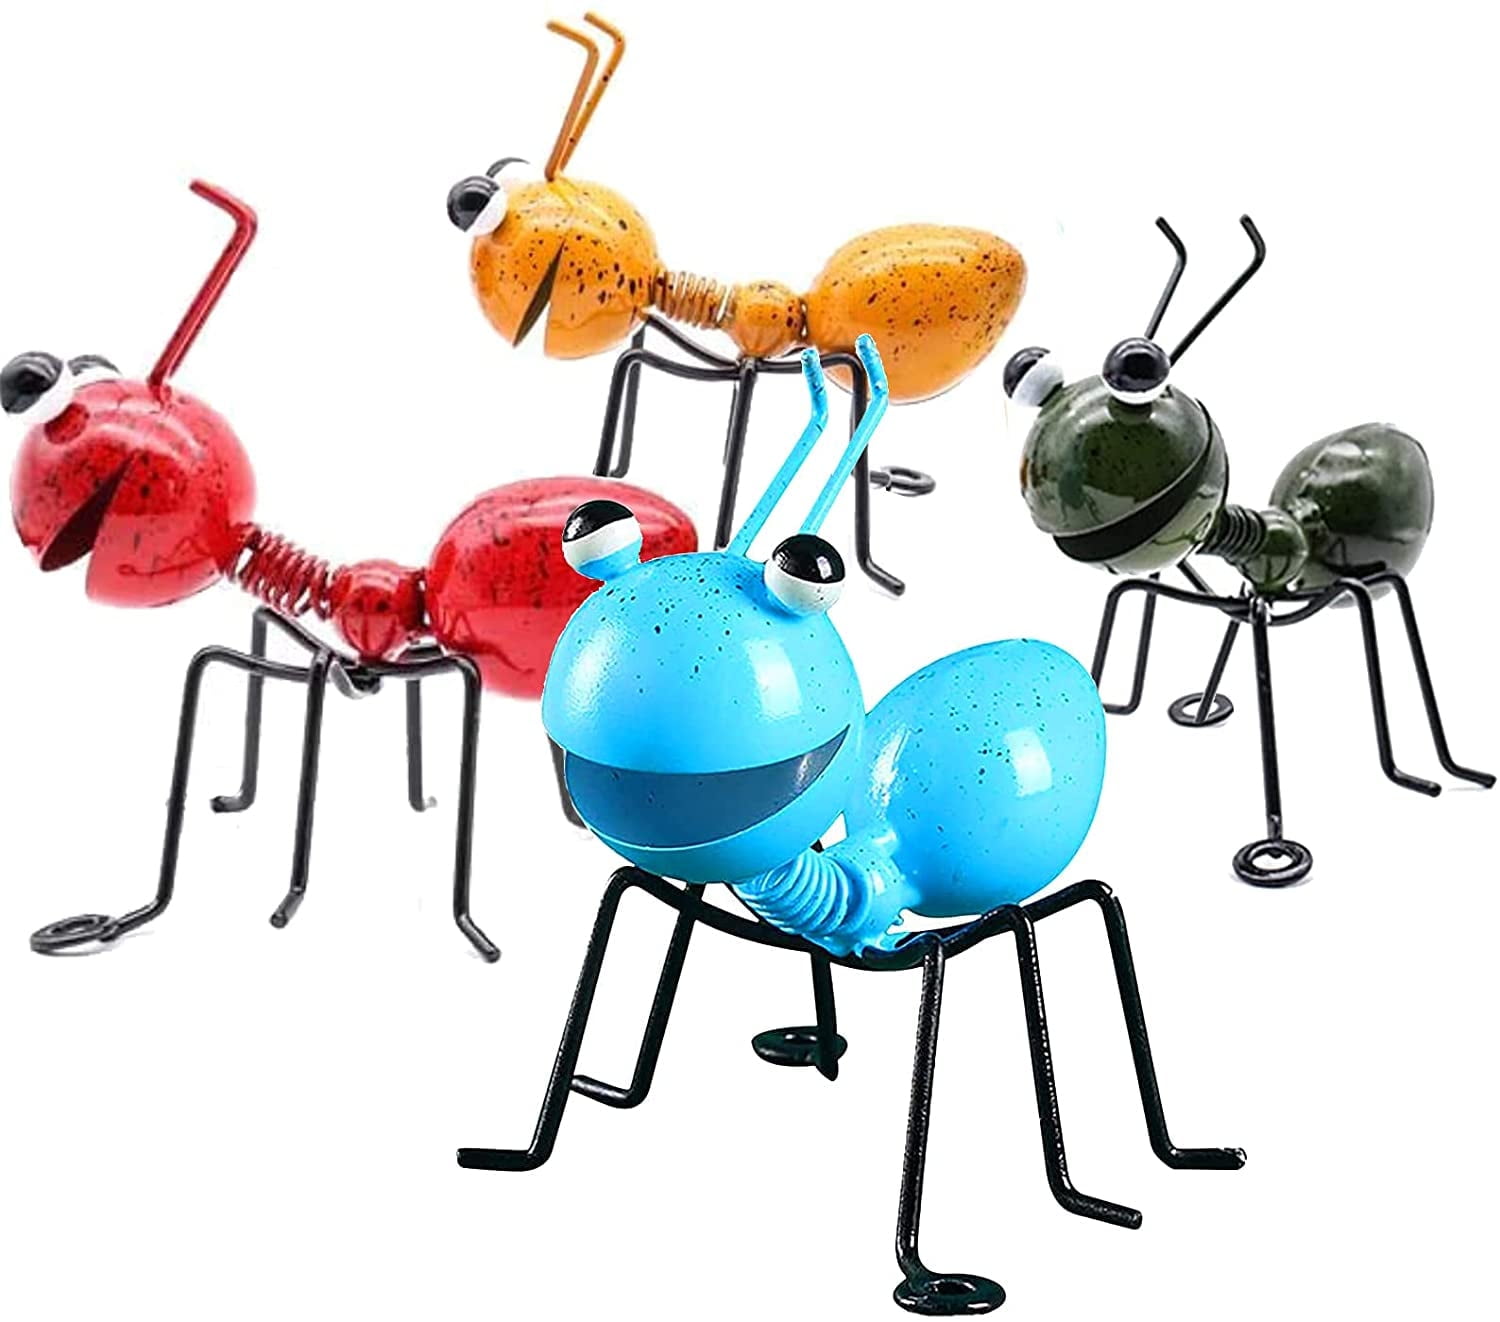 4PCS Colorful Metal Ant Wall Decor Bathroom Yard Art Wall Sculptures For  Outdoor Backyard Porch Patio Lawn Animal Decoration - AliExpress